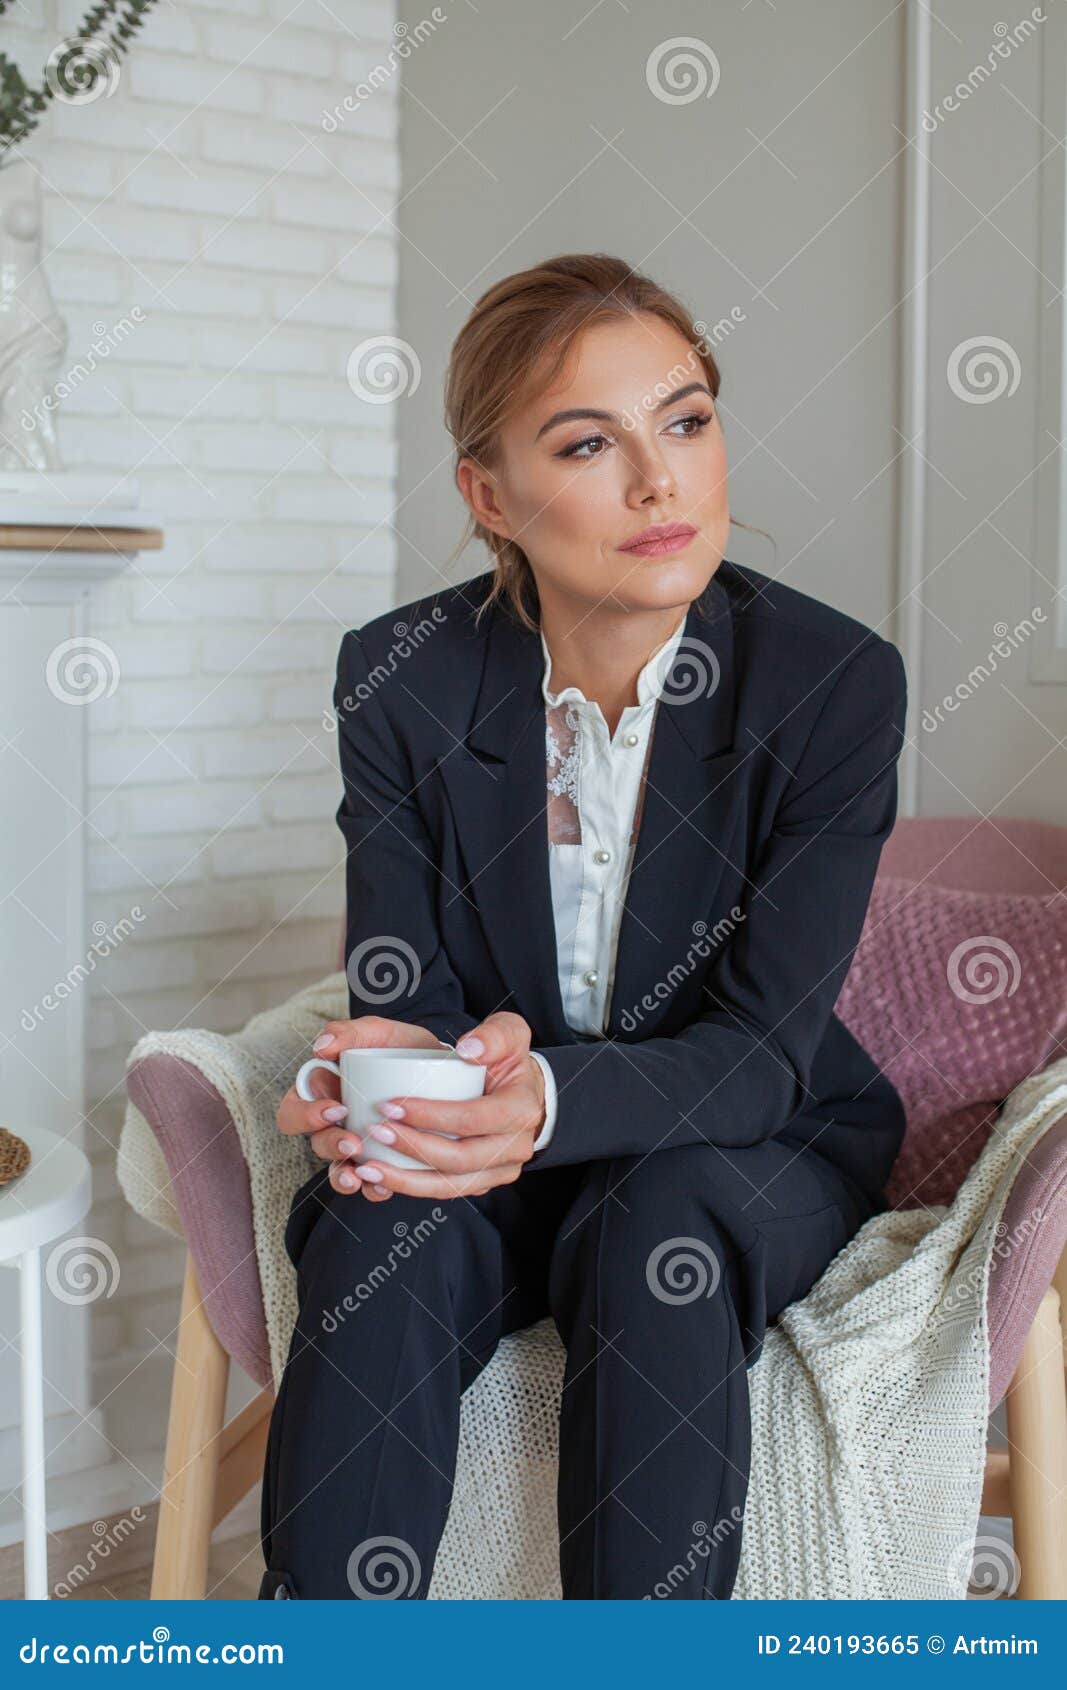 Smiling Woman Sitting on Armchair and Drinking Coffee Stock Image ...